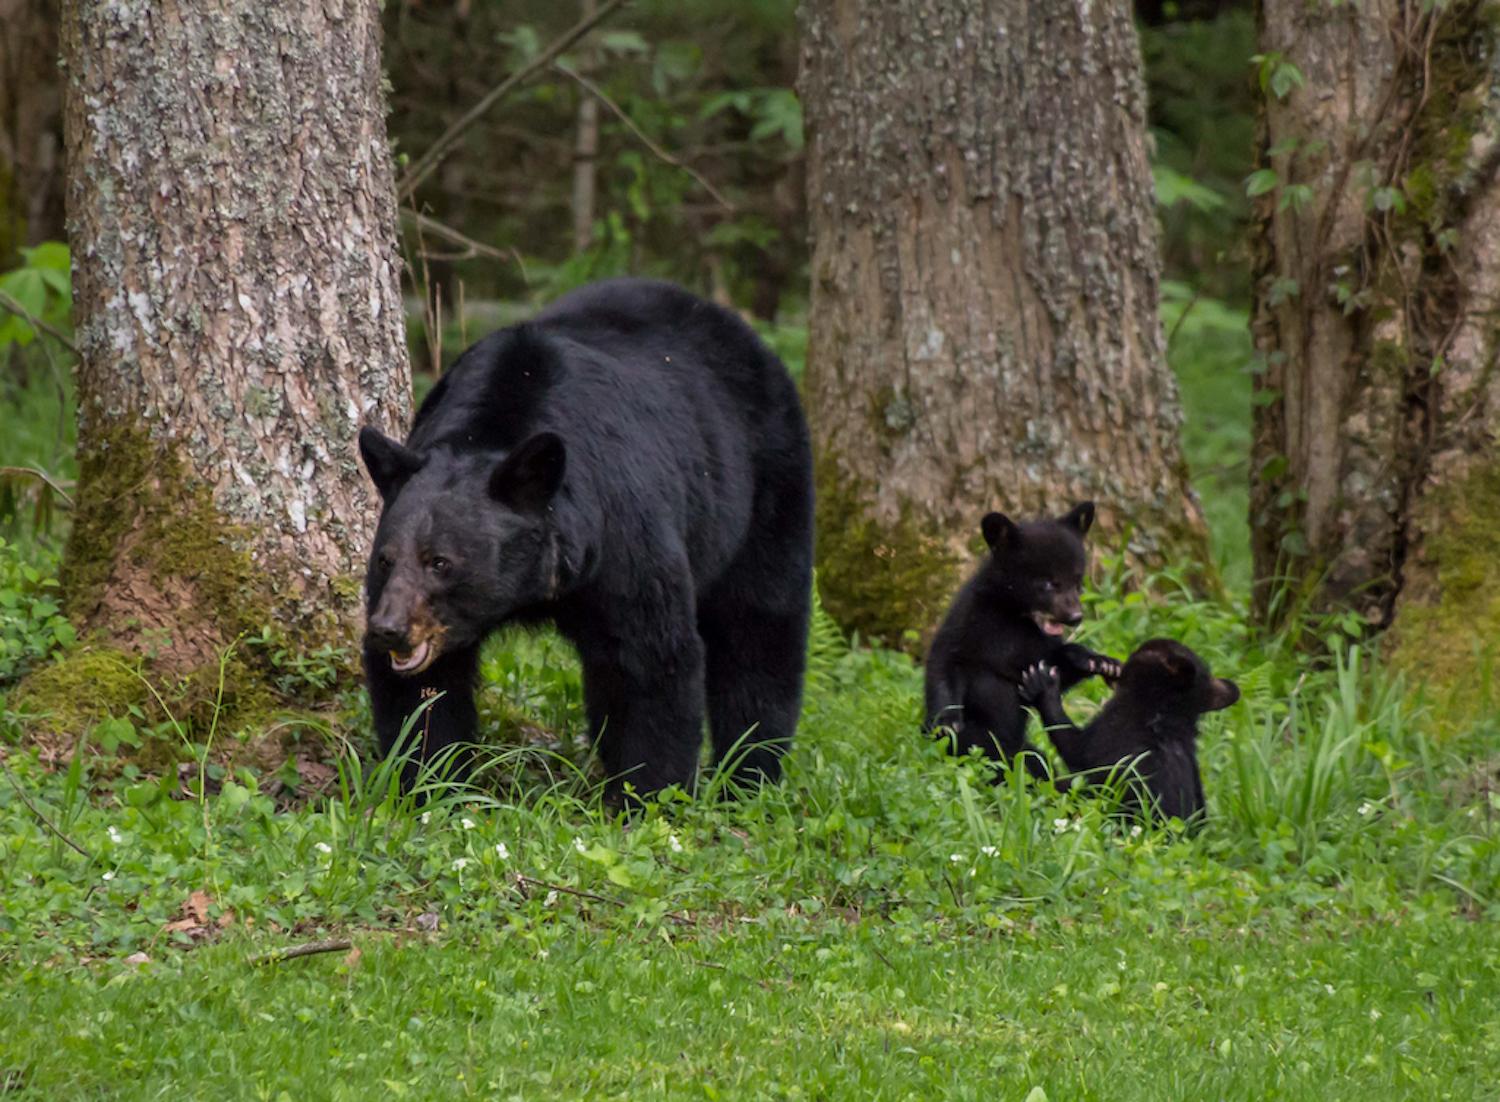 In sync with bears’ emergence, Great Smoky Mountains Association has just released a new book teaching kids the importance of bears’ natural foods and showing what can happen when bears are allowed access to the food humans eat or the scraps and trash tho